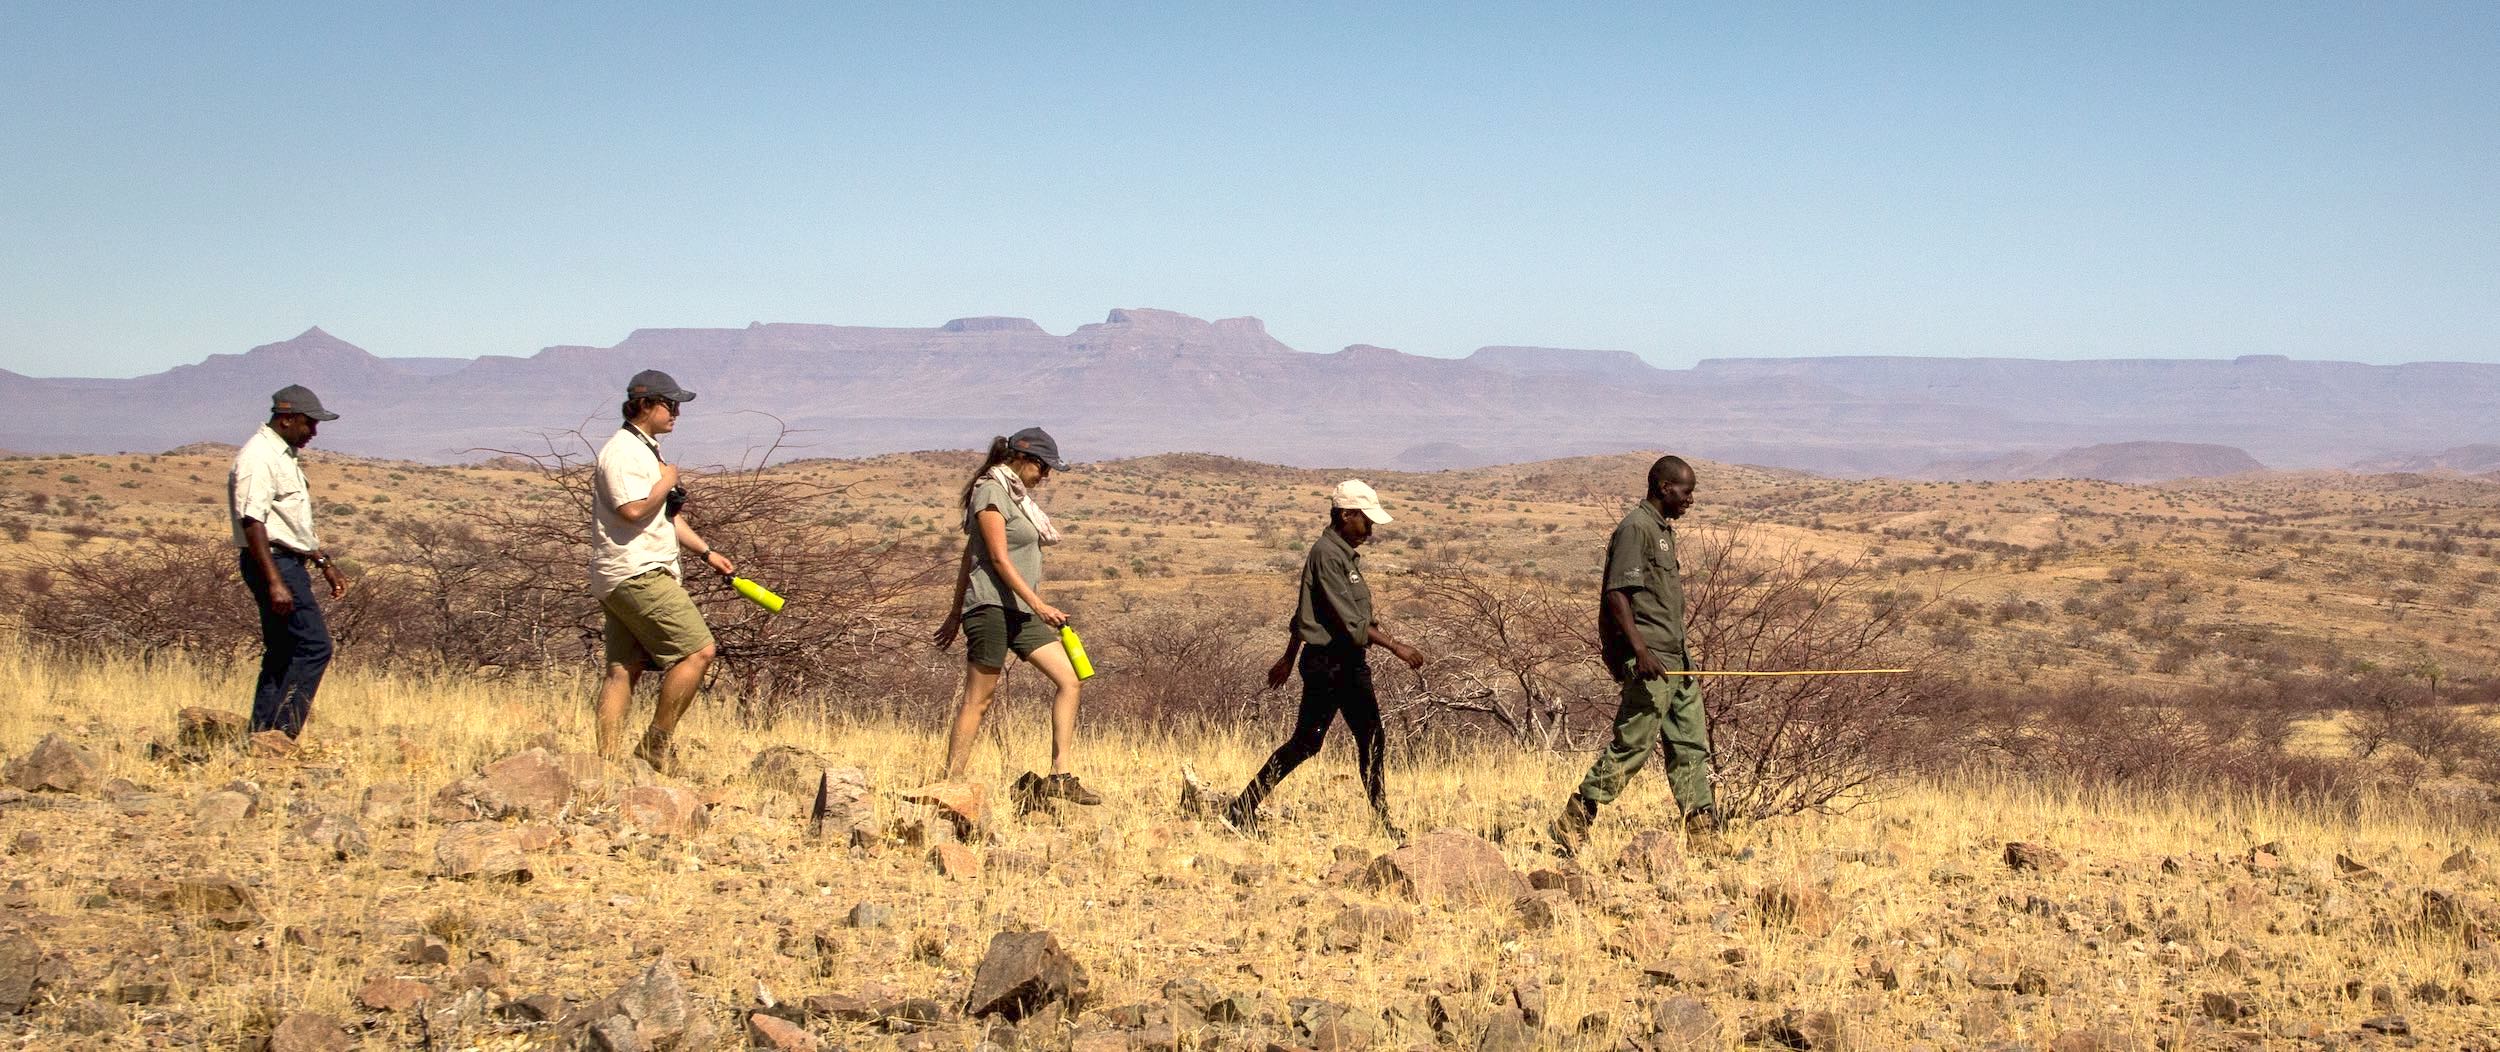 A guide leads a group of tourists on a trek across the stunning scenery of north-western Namibia.